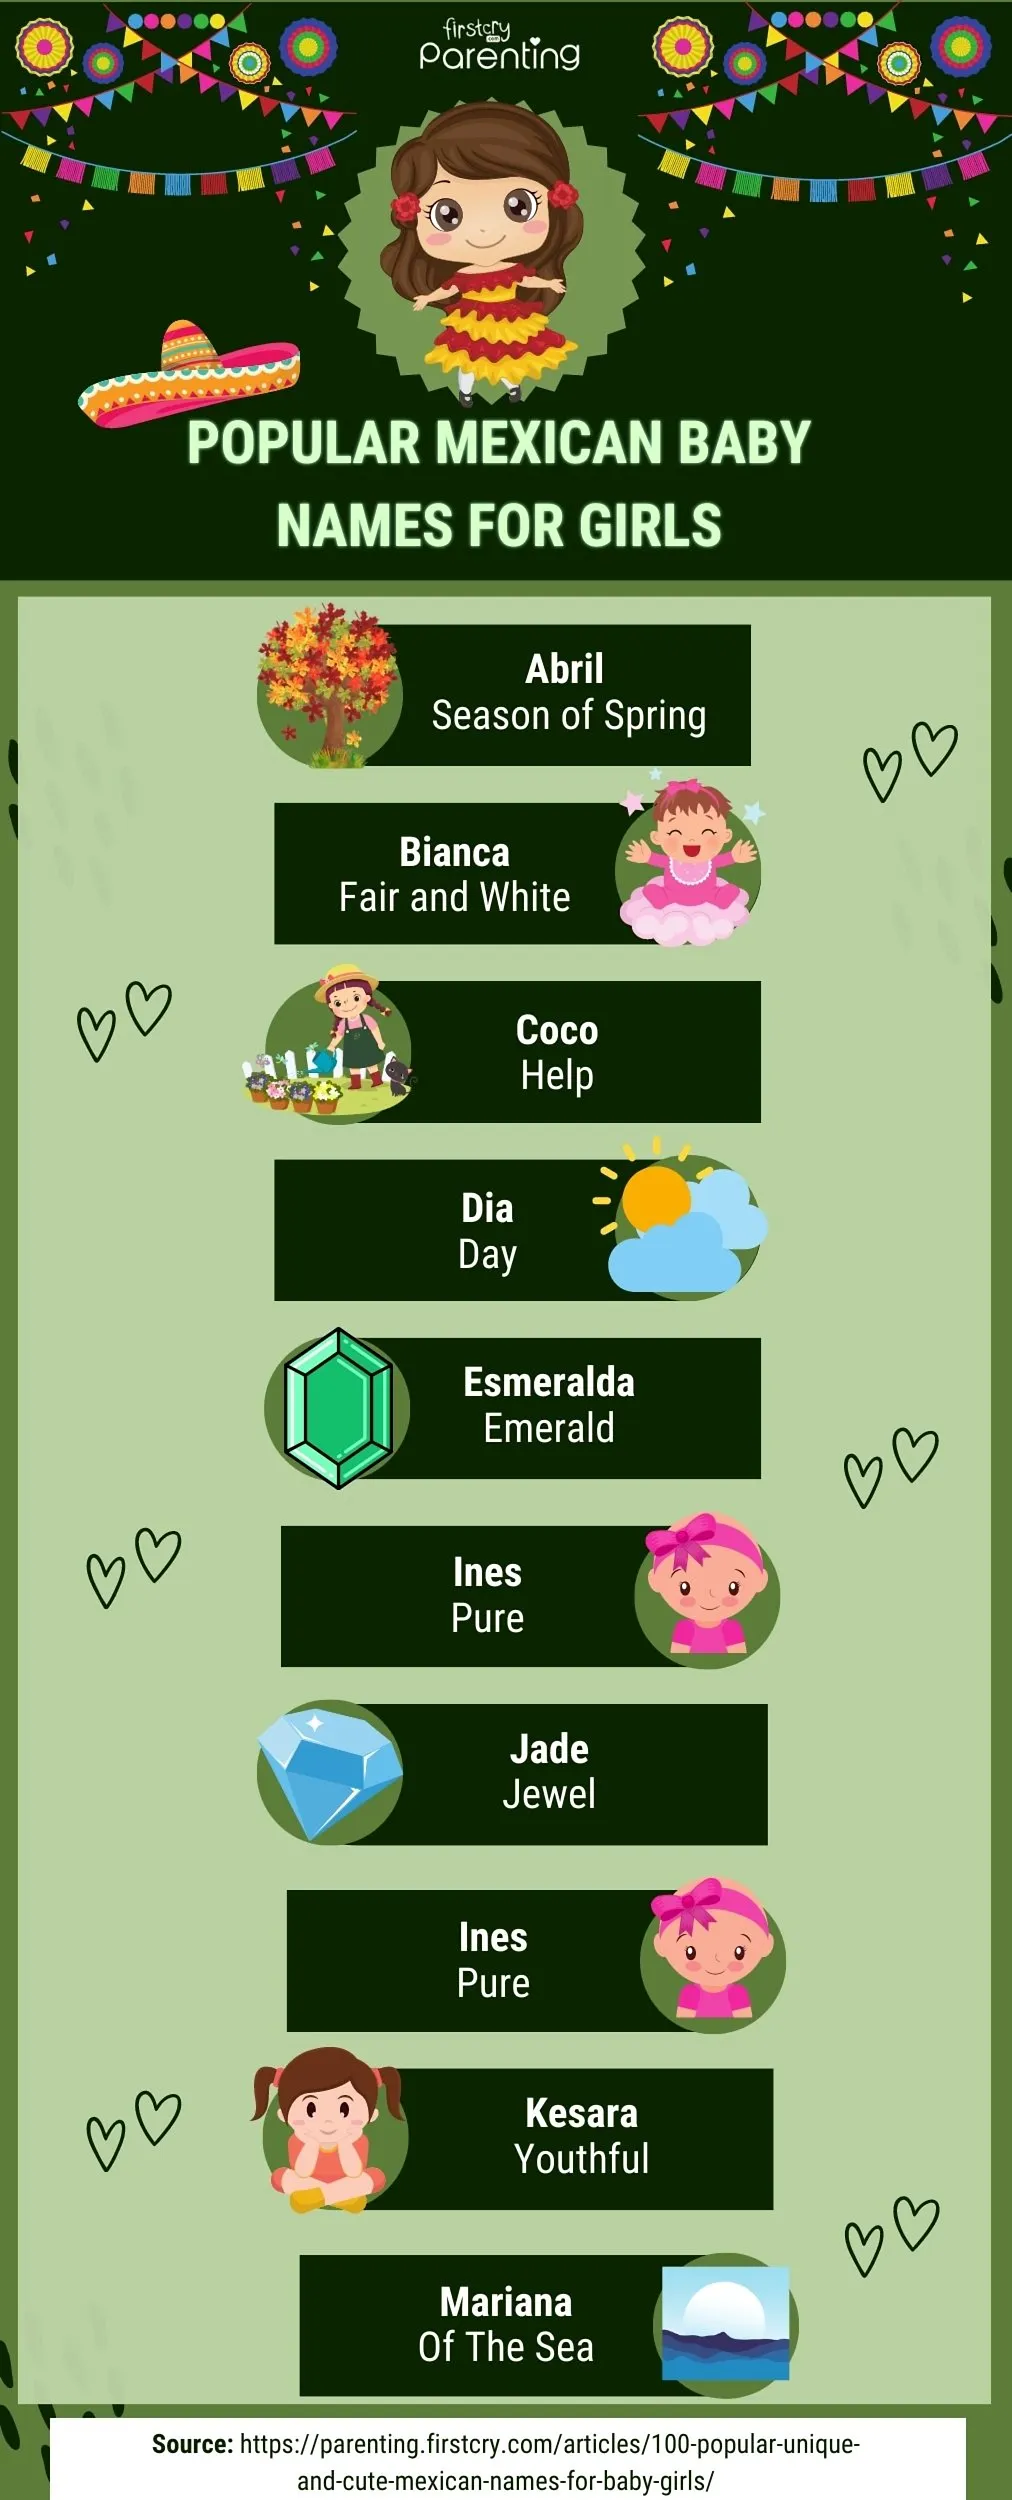 Popular Mexican Baby Names for Girls - Infographic